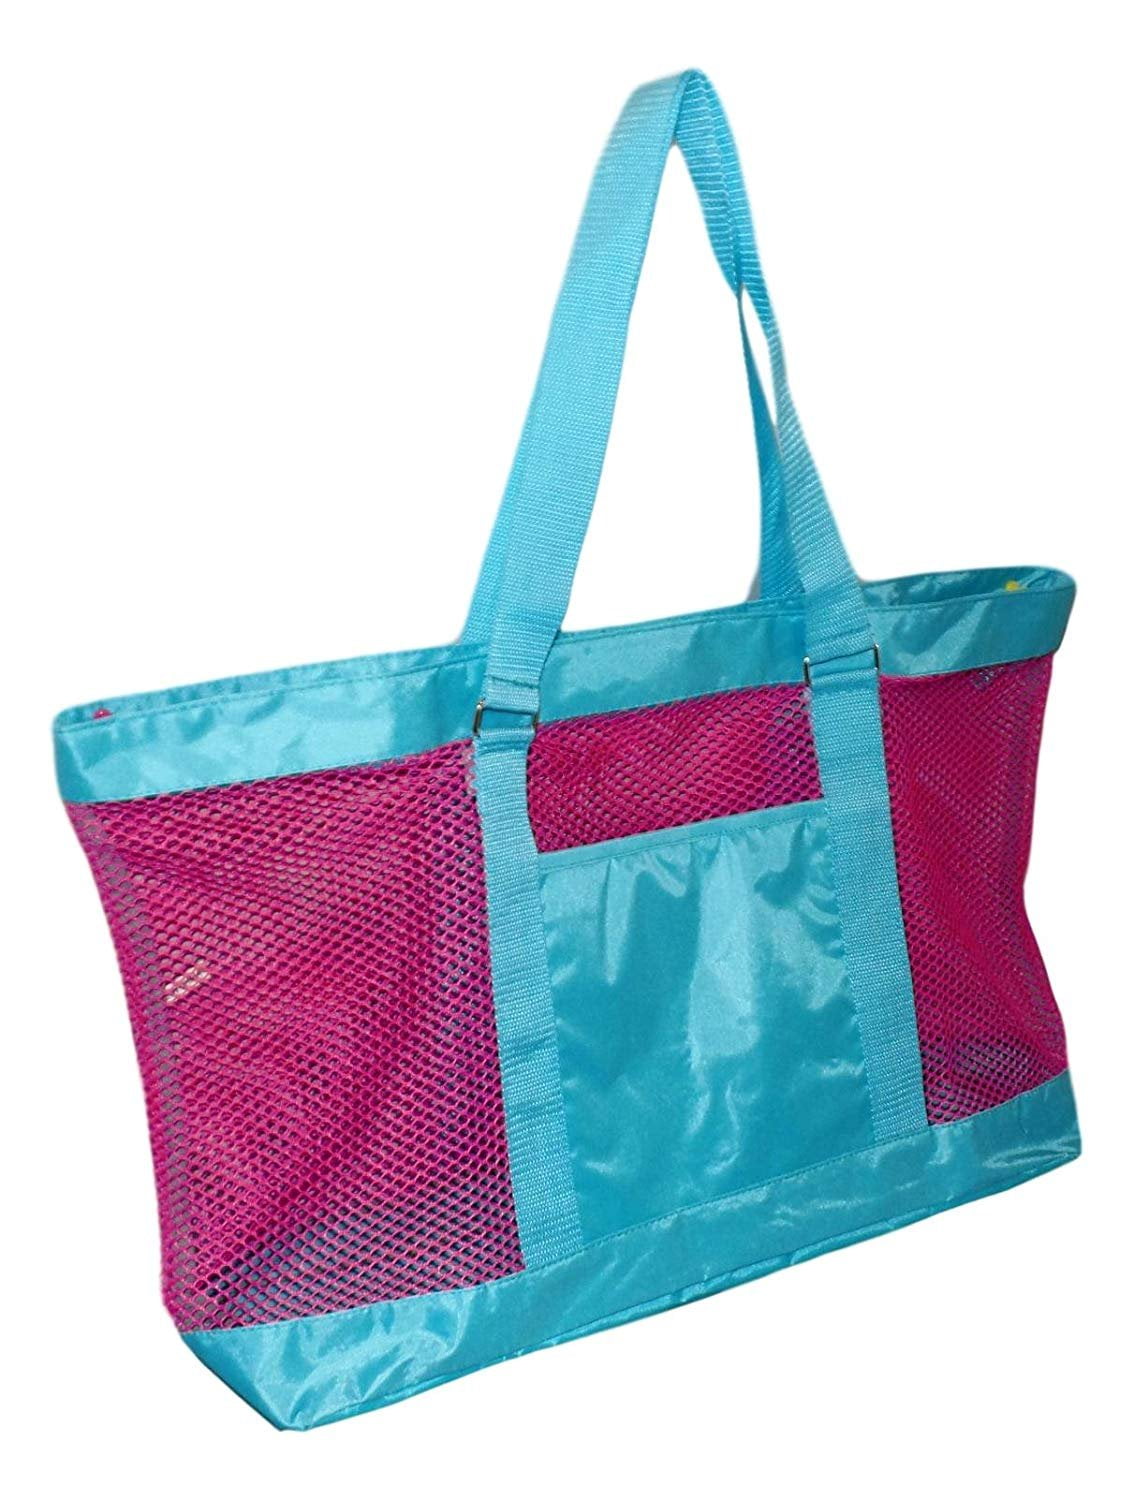 Details about   Mothra Tote Bag Great for Beach Totes & Grocery Shopping